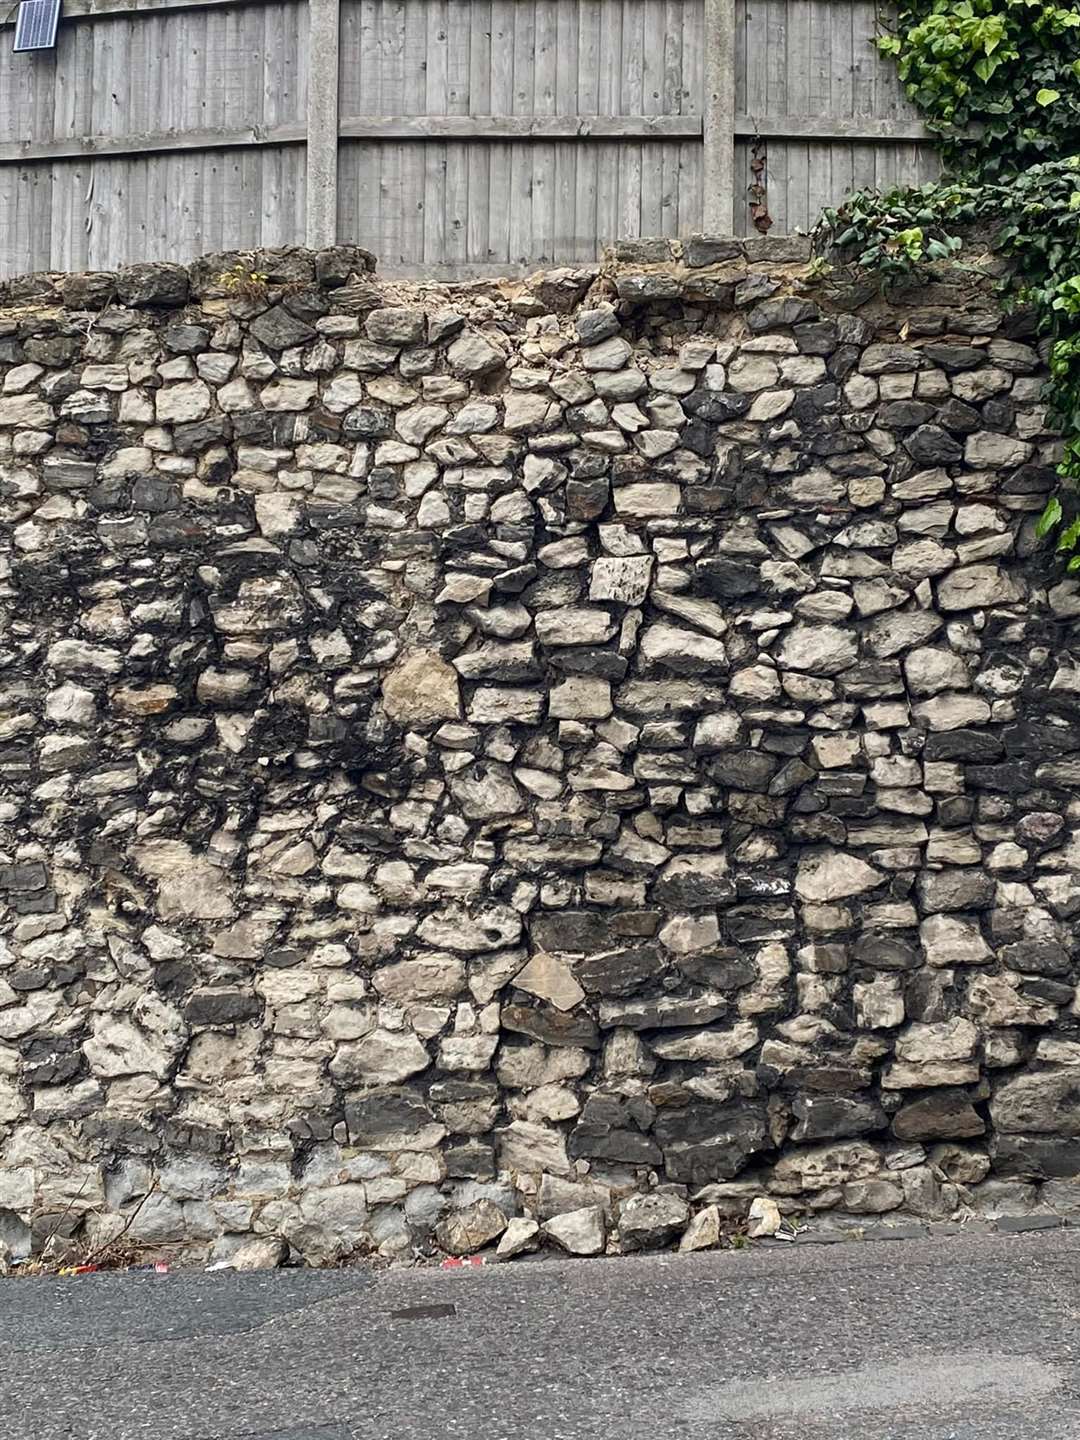 Stones have fallen from the top of the bowing wall in The Cut, Rochester. Images from Teresa Brighouse